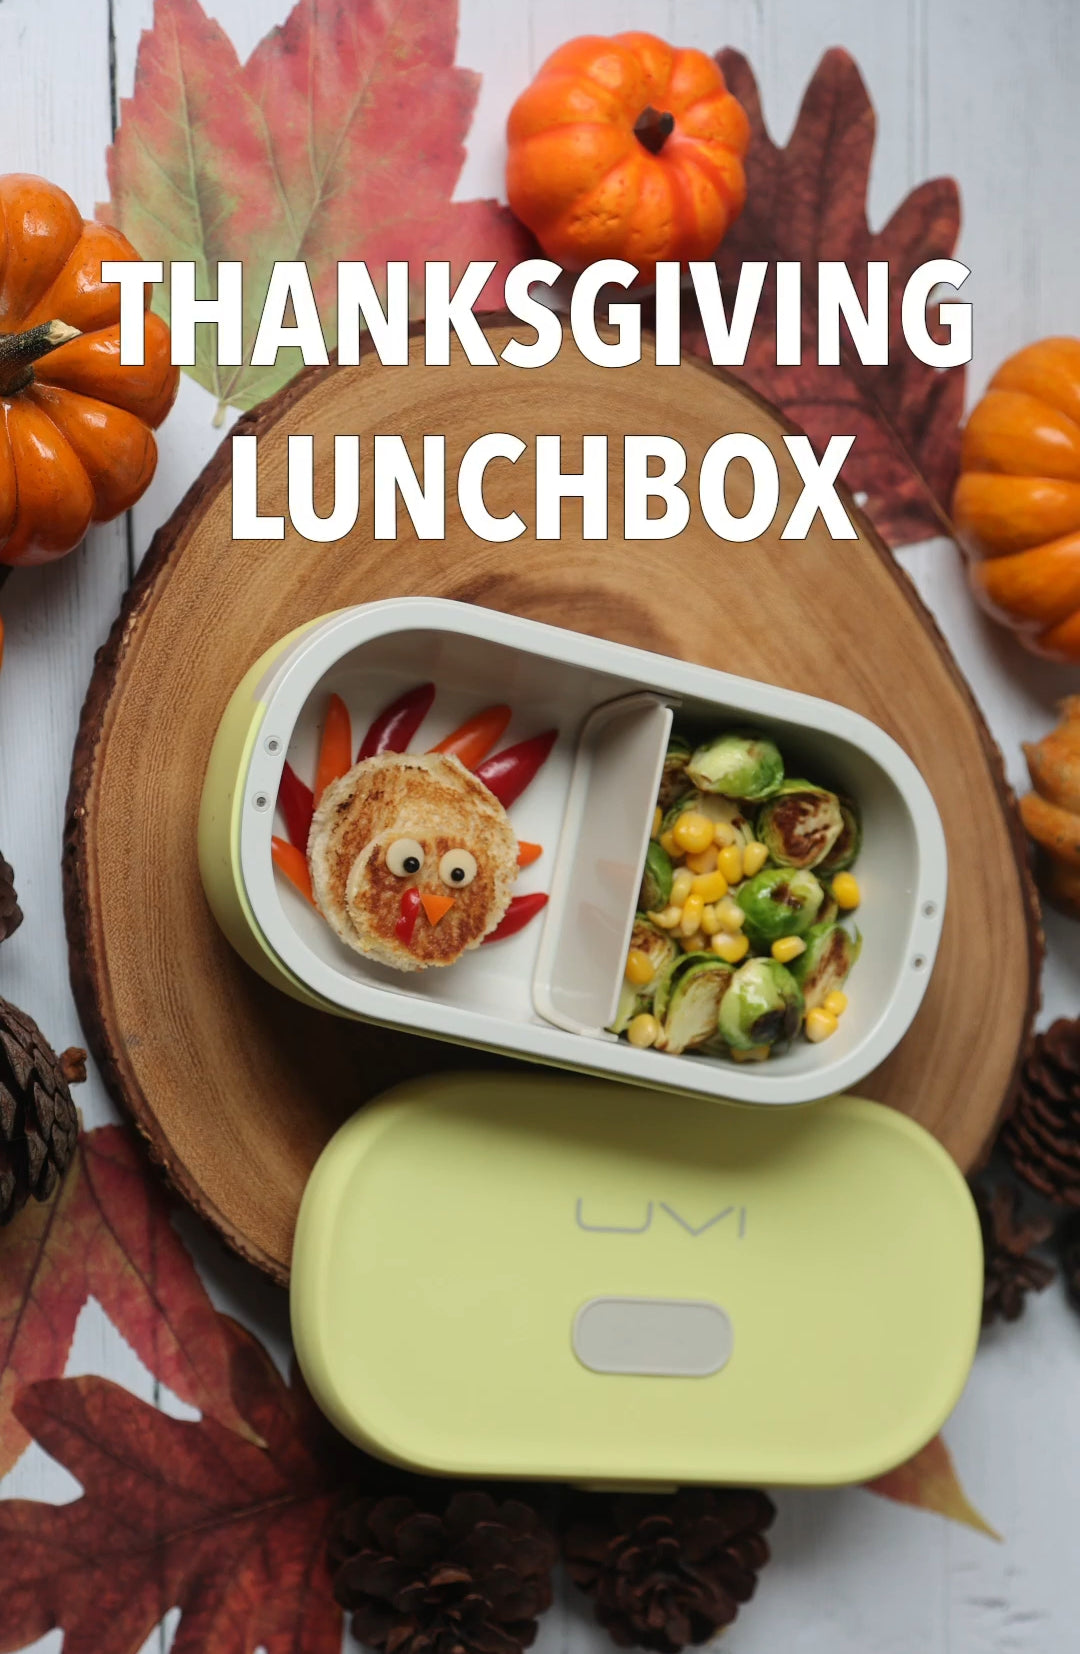 Thanksgiving warm meal in your UVI LUNCHBOX